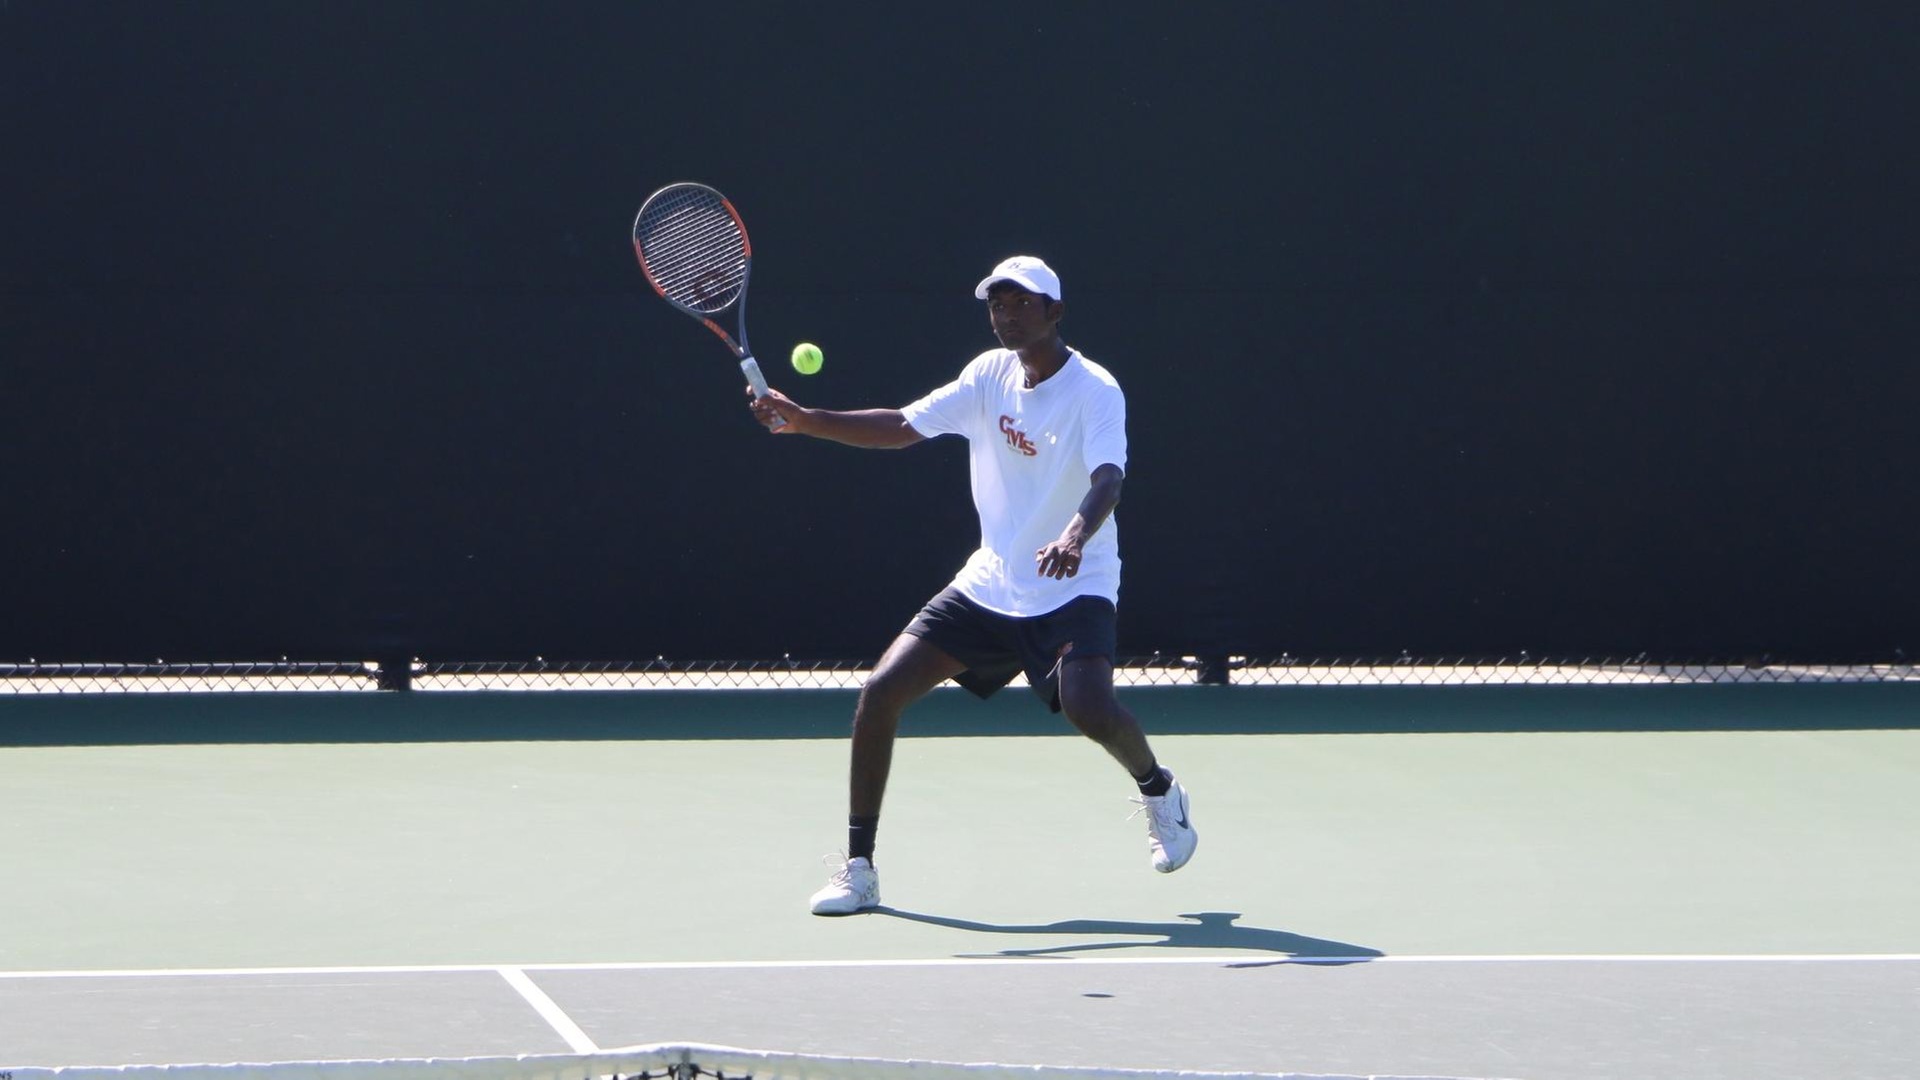 Advik Mareedu went 9-0 in the fall on his way to an ITA Cup title